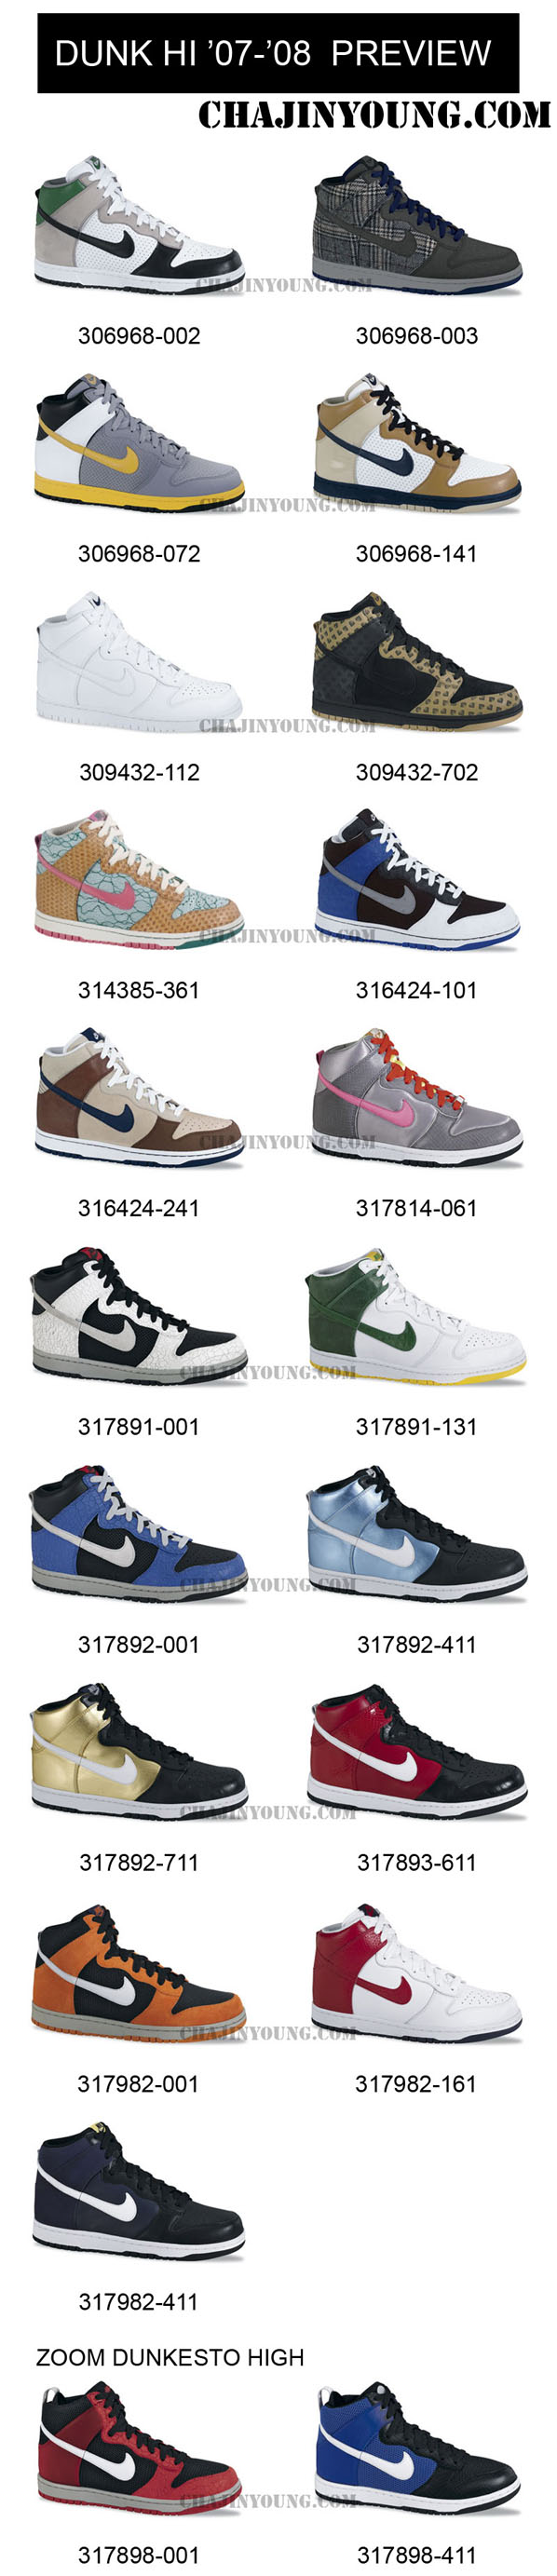 Nike Dunk 2007/2008 Preview